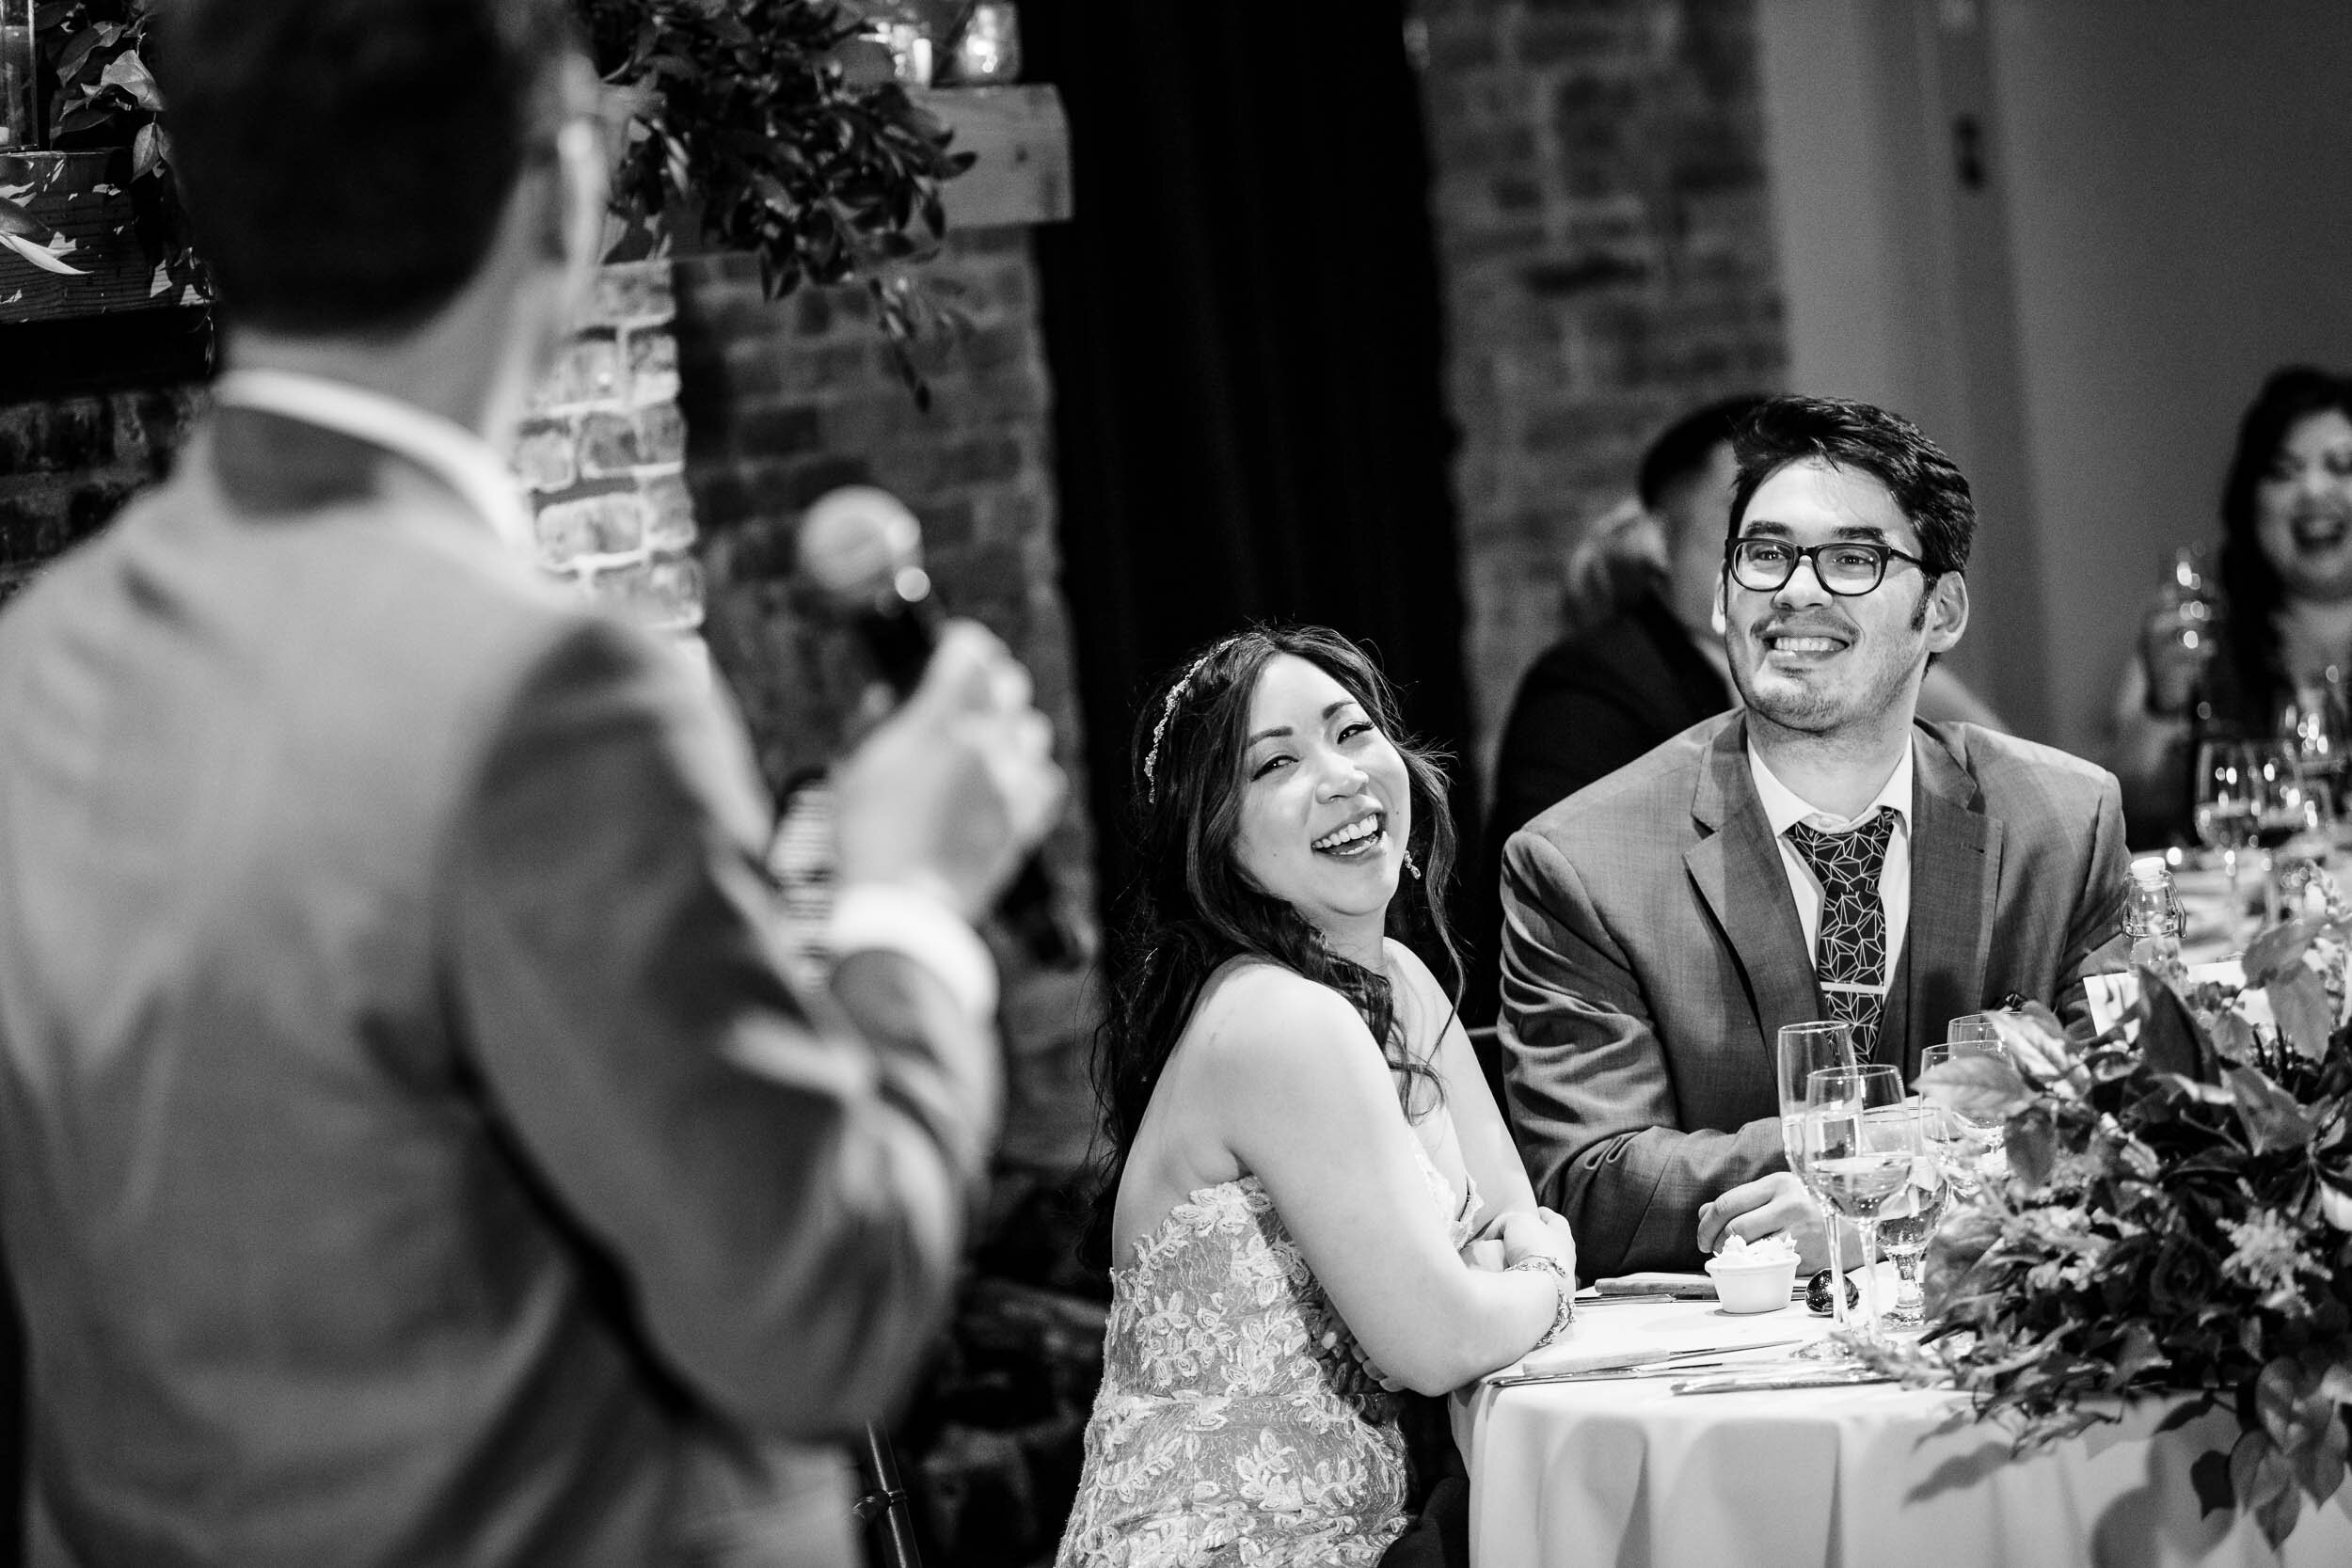 Wedding Day Photos | City Winery | J. Brown Photography | bride laughs during maid of honor toast.